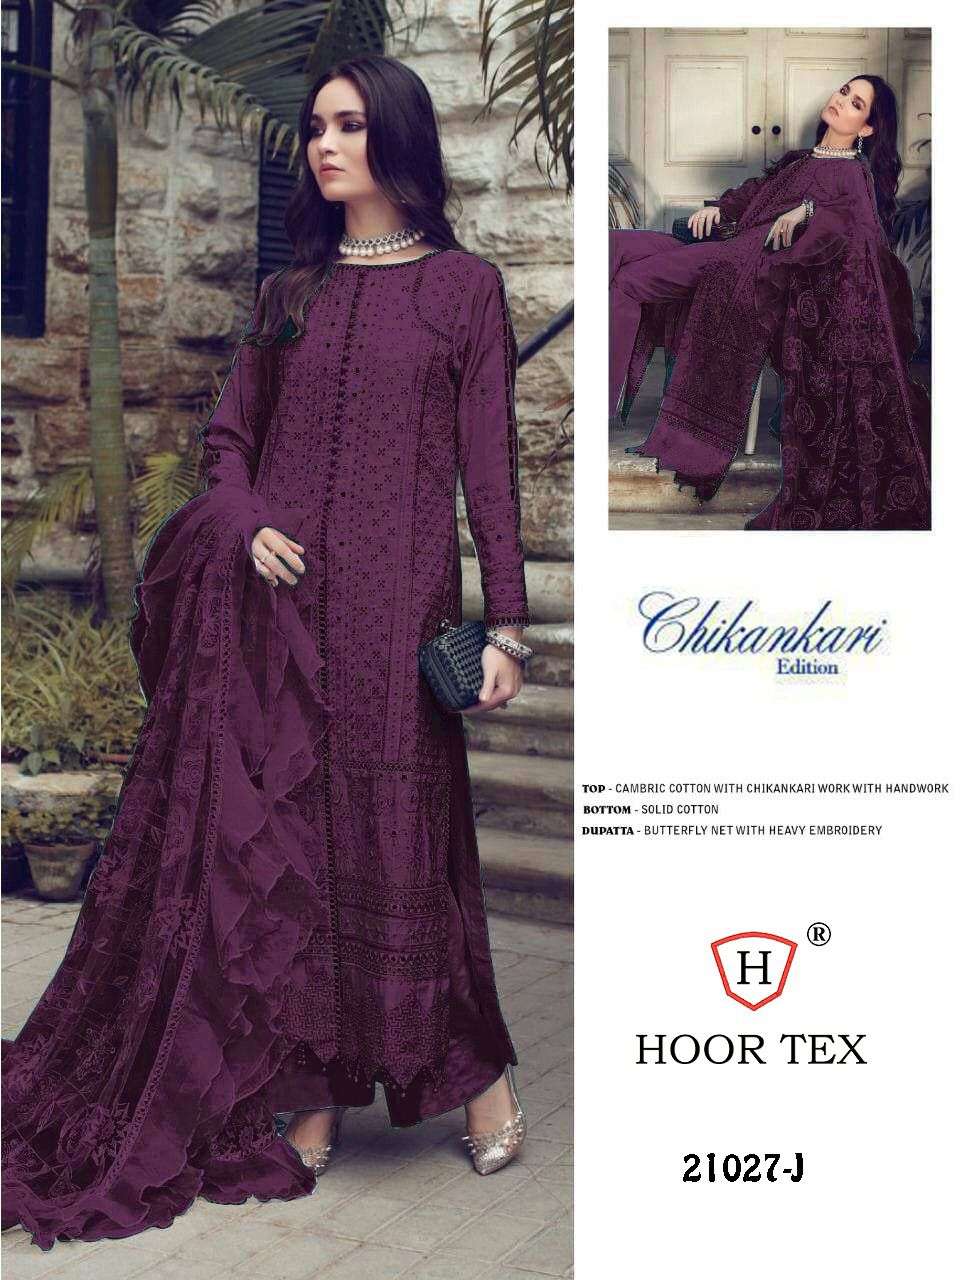 pakistani new concept suits by hoor tex design number 21027 pakistani concept indian suits collection moti work and embroidery beautifull suits dresses churidar salwar kameez